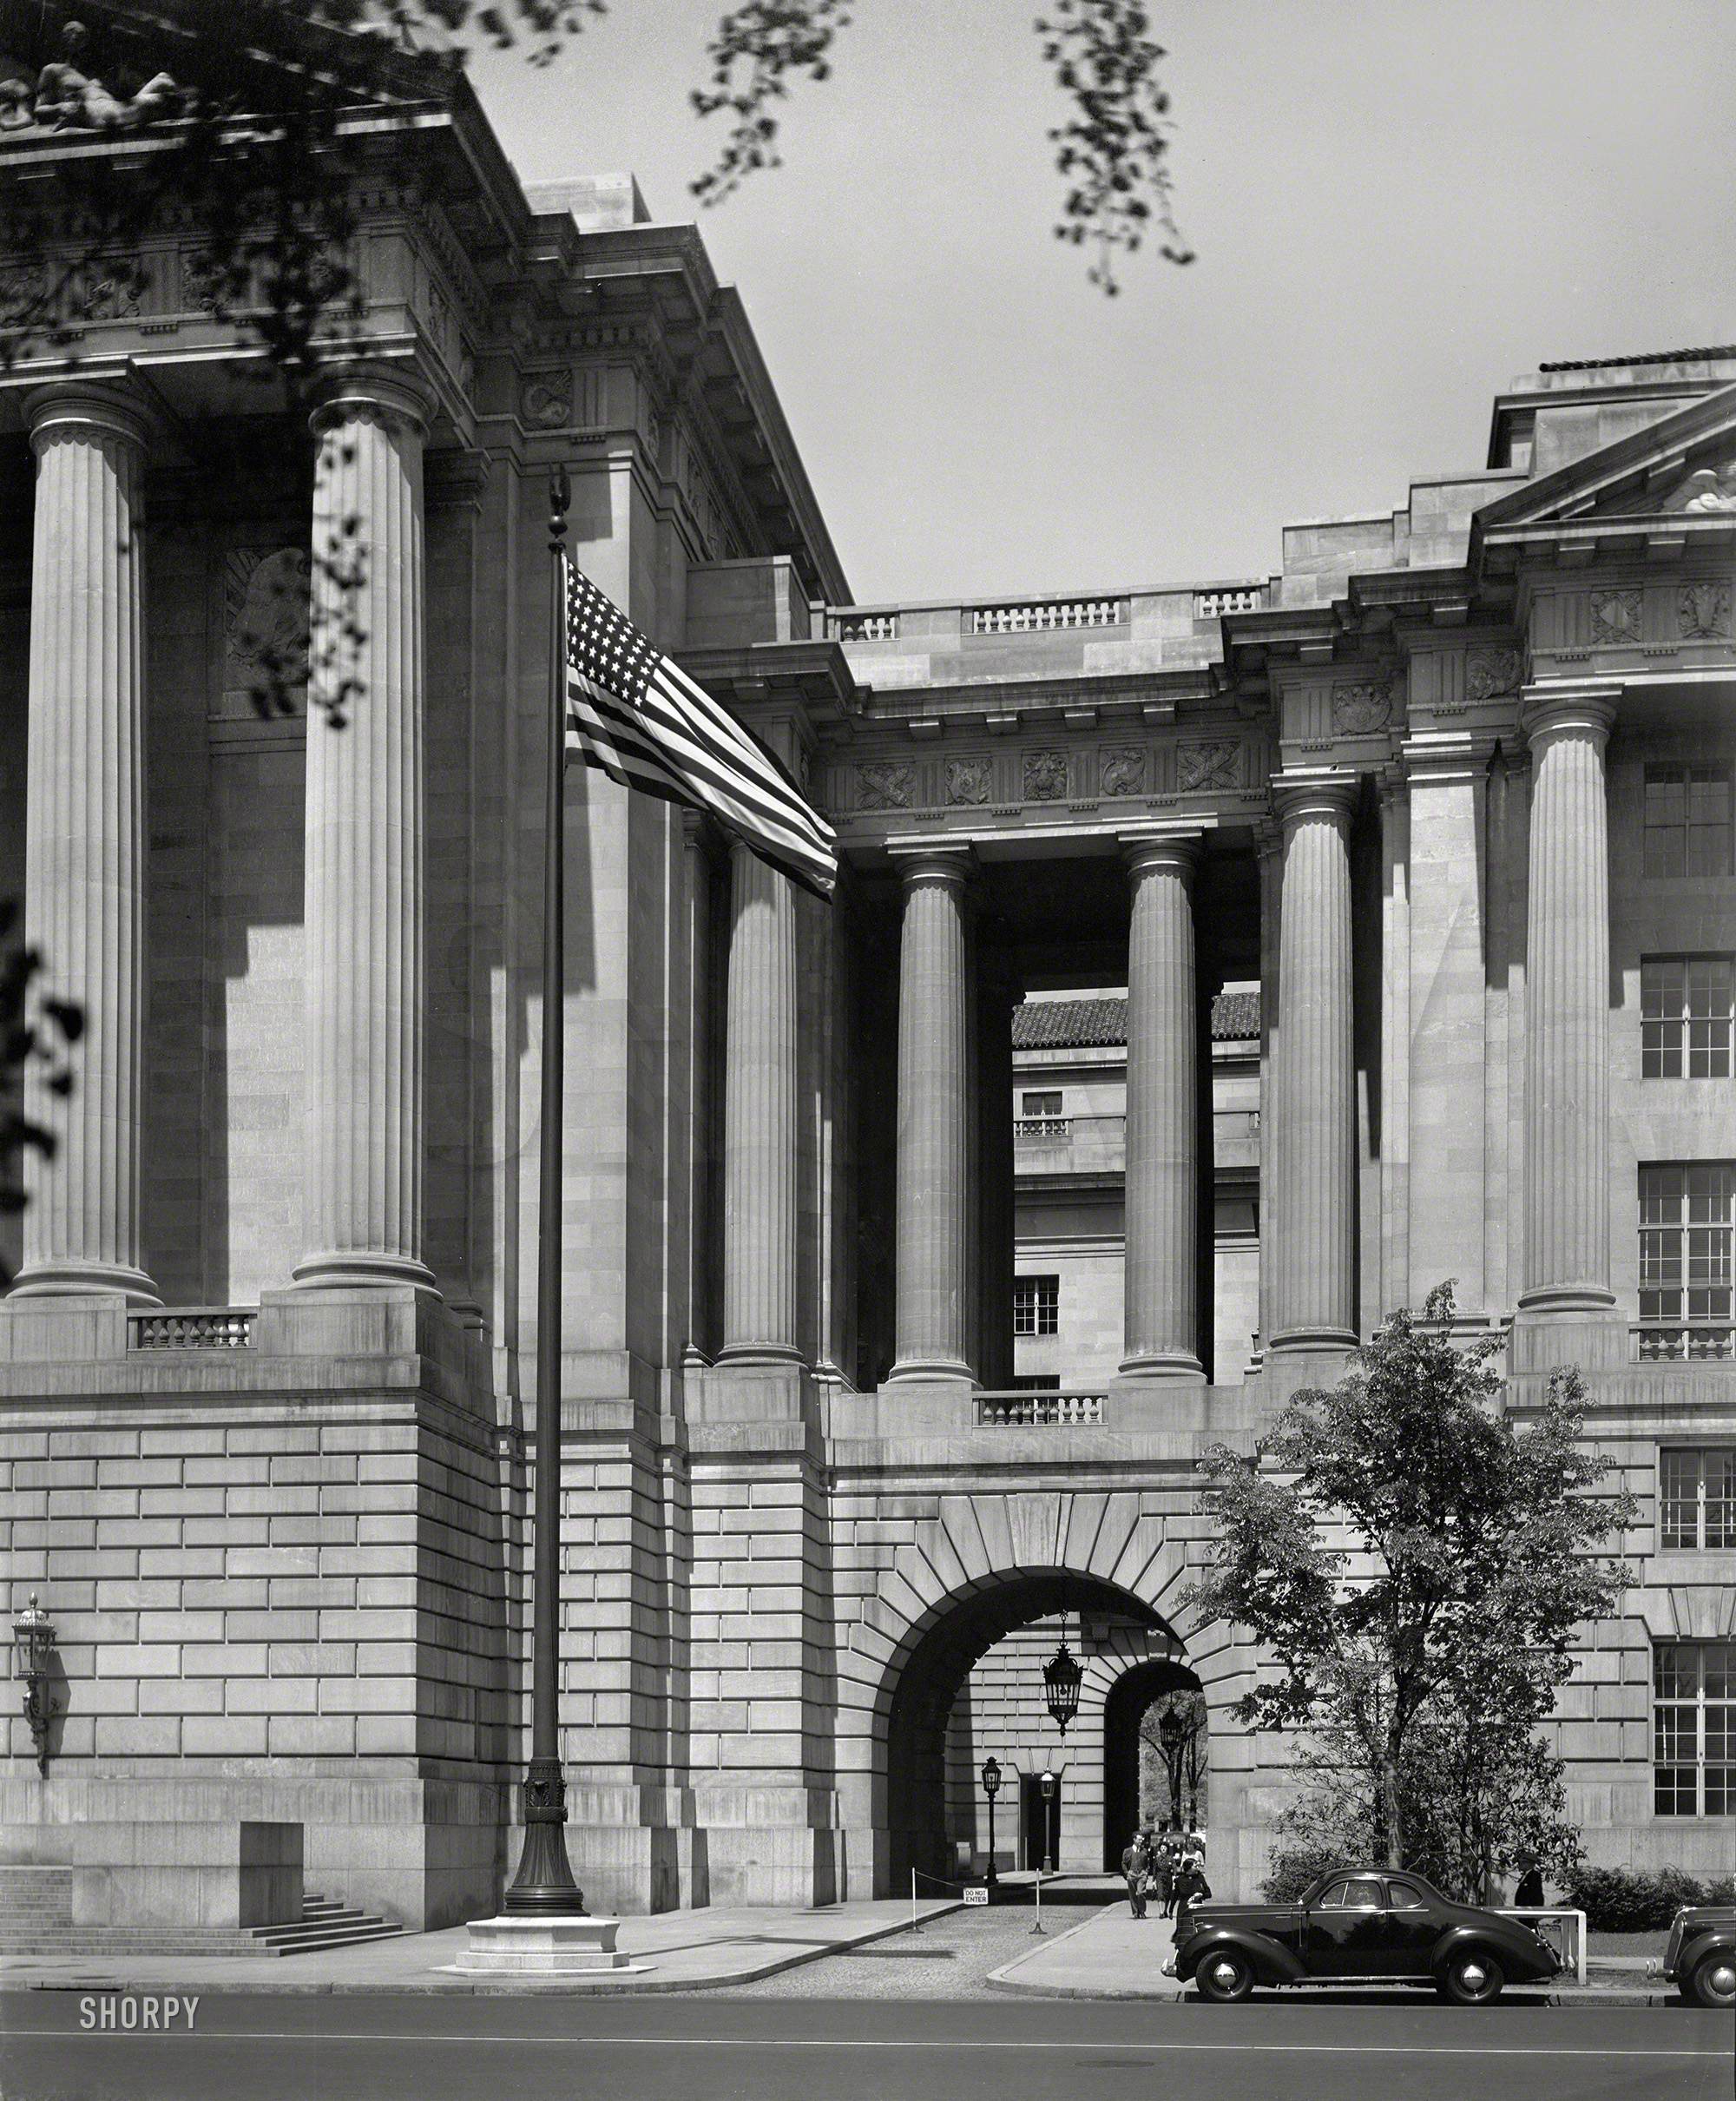 Washington, D.C., circa 1937. "U.S. Labor Department and Interstate Commerce Commission Building. Passageway between ICC and Departmental Auditorium sections." 8x10 acetate negative by Theodor Horydczak. View full size.